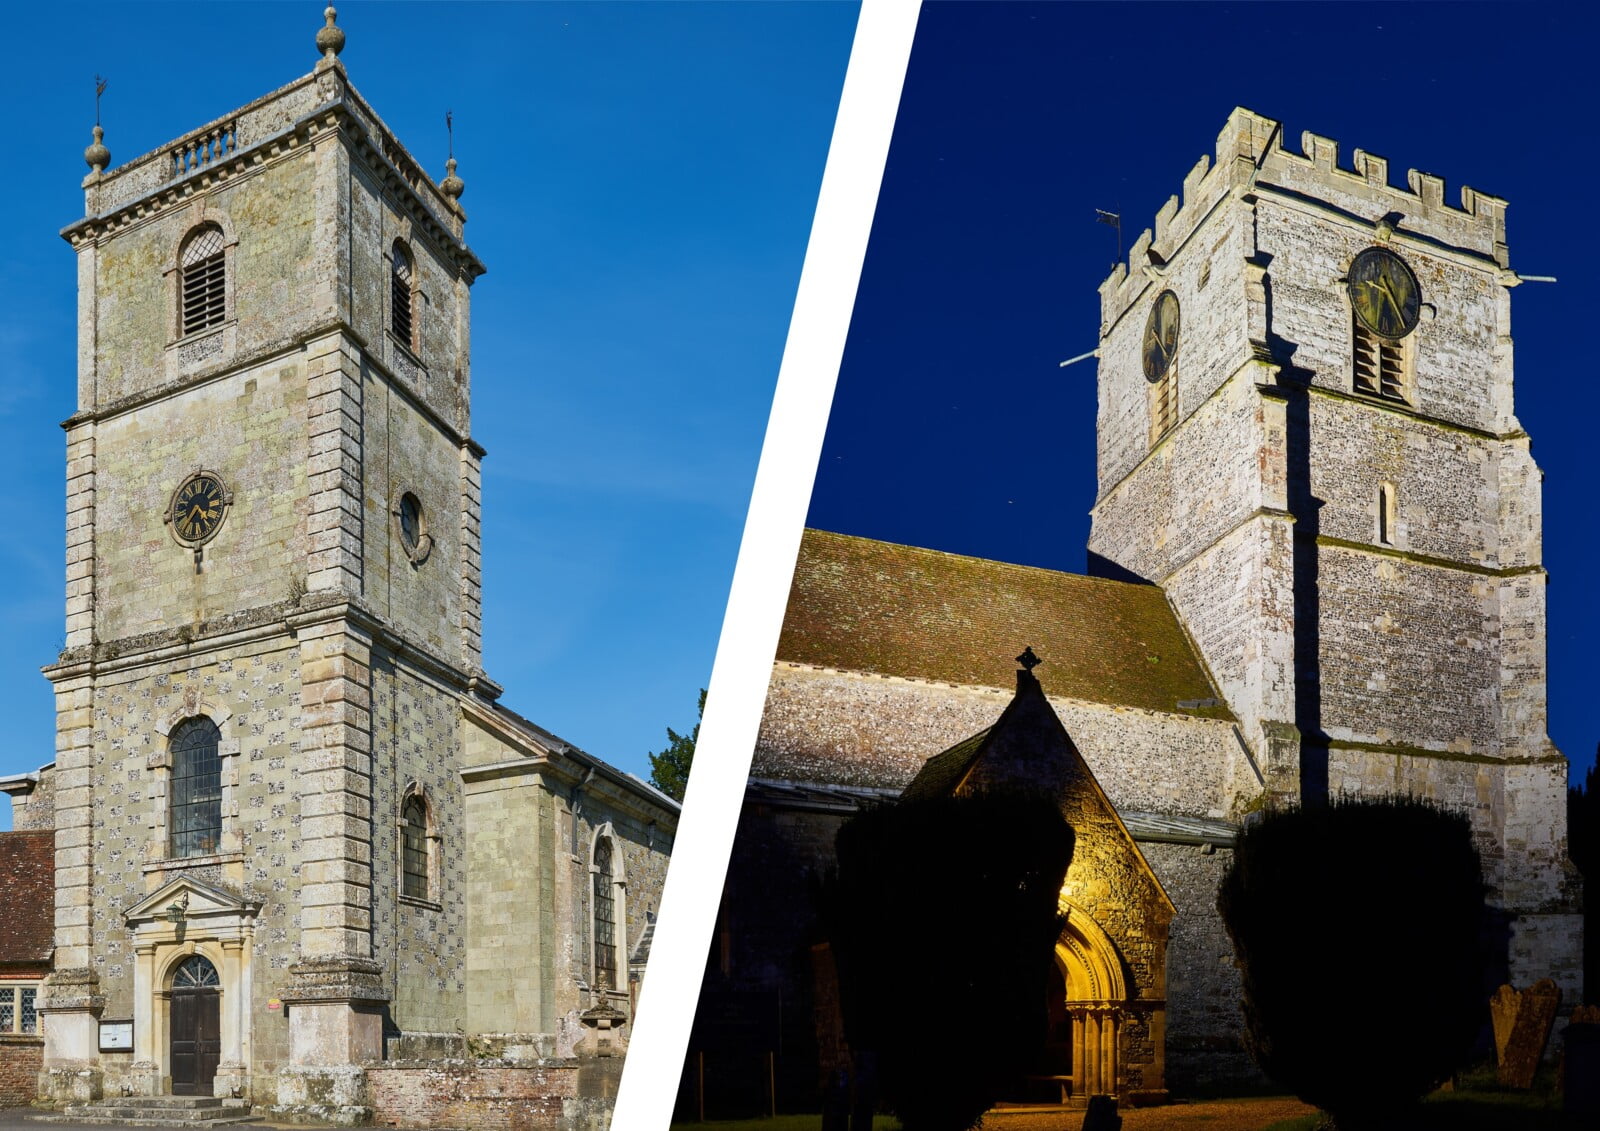 The exteriors of the churches of Wimborne St Giles and Cranborne